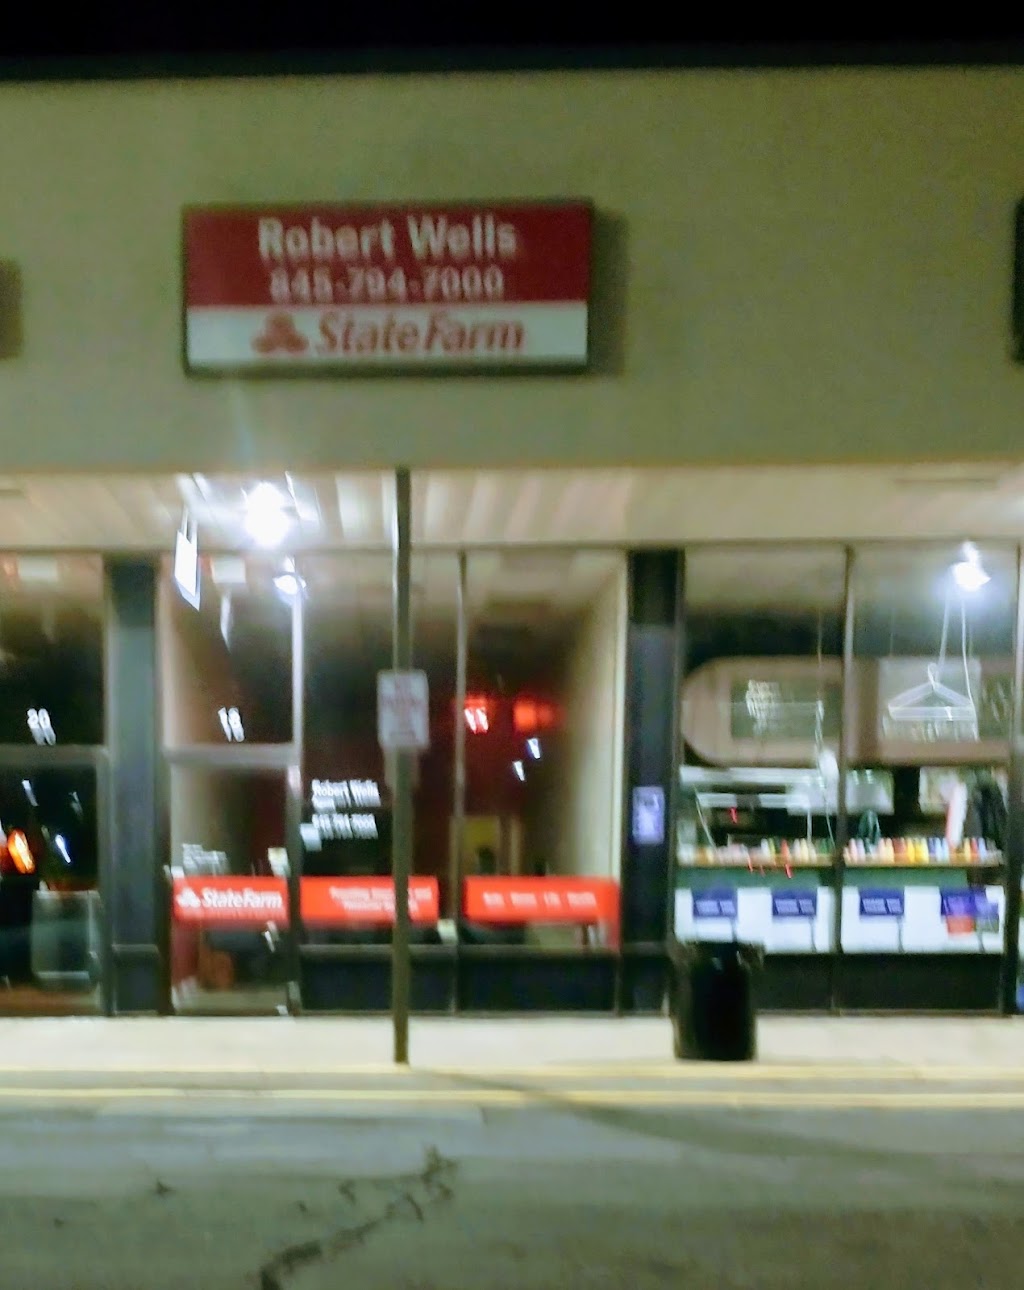 Robert Wells - State Farm Insurance Agent | 18 Thompson Square, Monticello, NY 12701 | Phone: (845) 794-7000